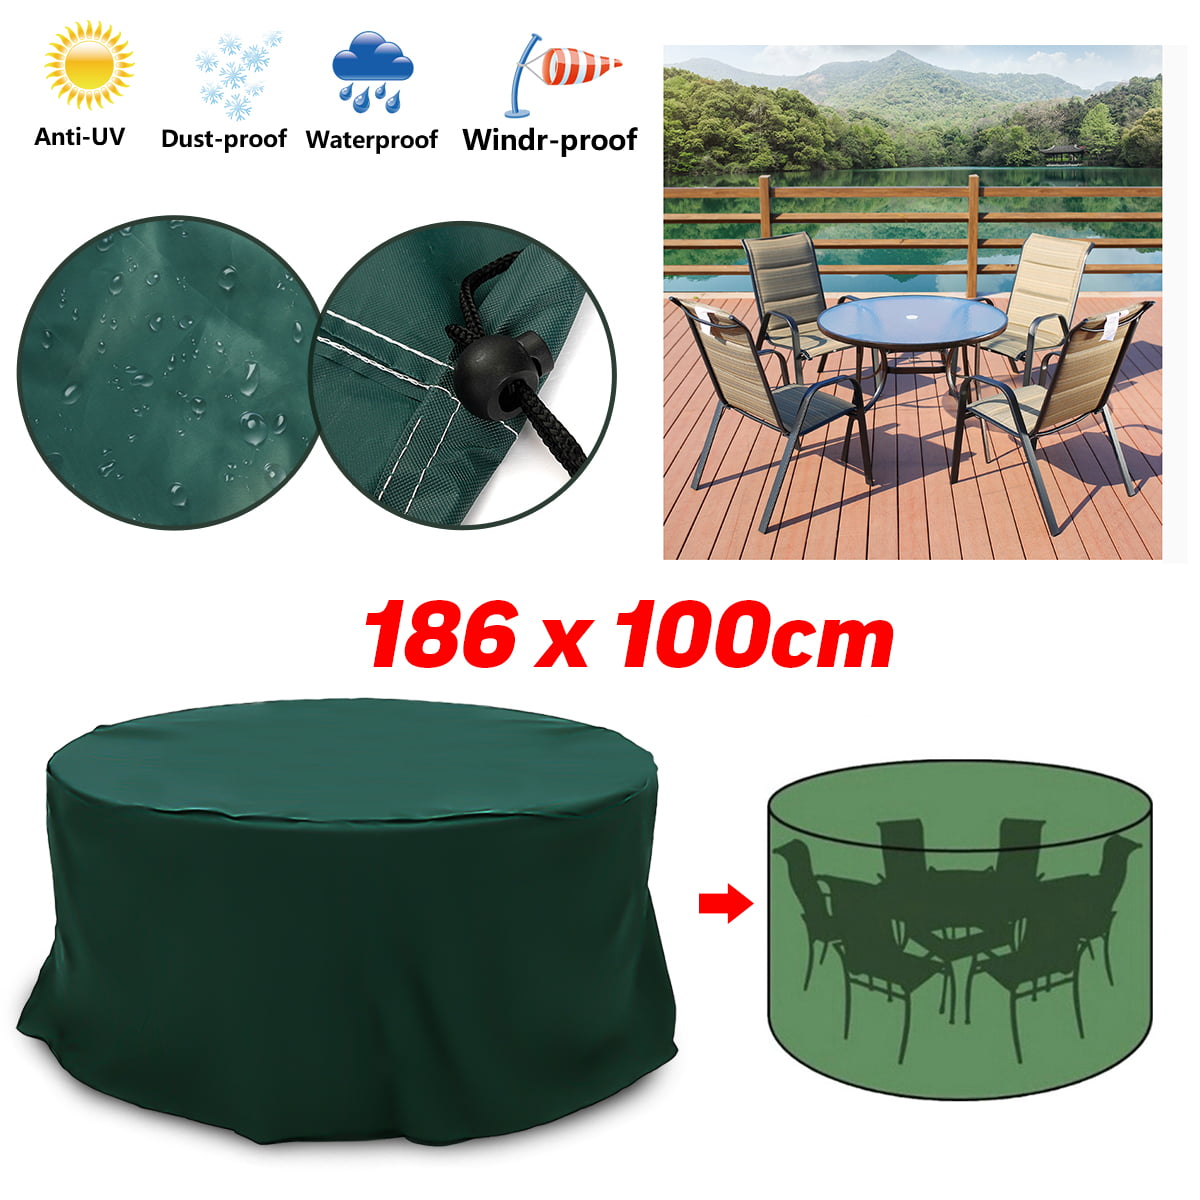 Waterproof Garden Patio Outdoor Furniture Cover Table Chair Seat Covers Anti-UV 